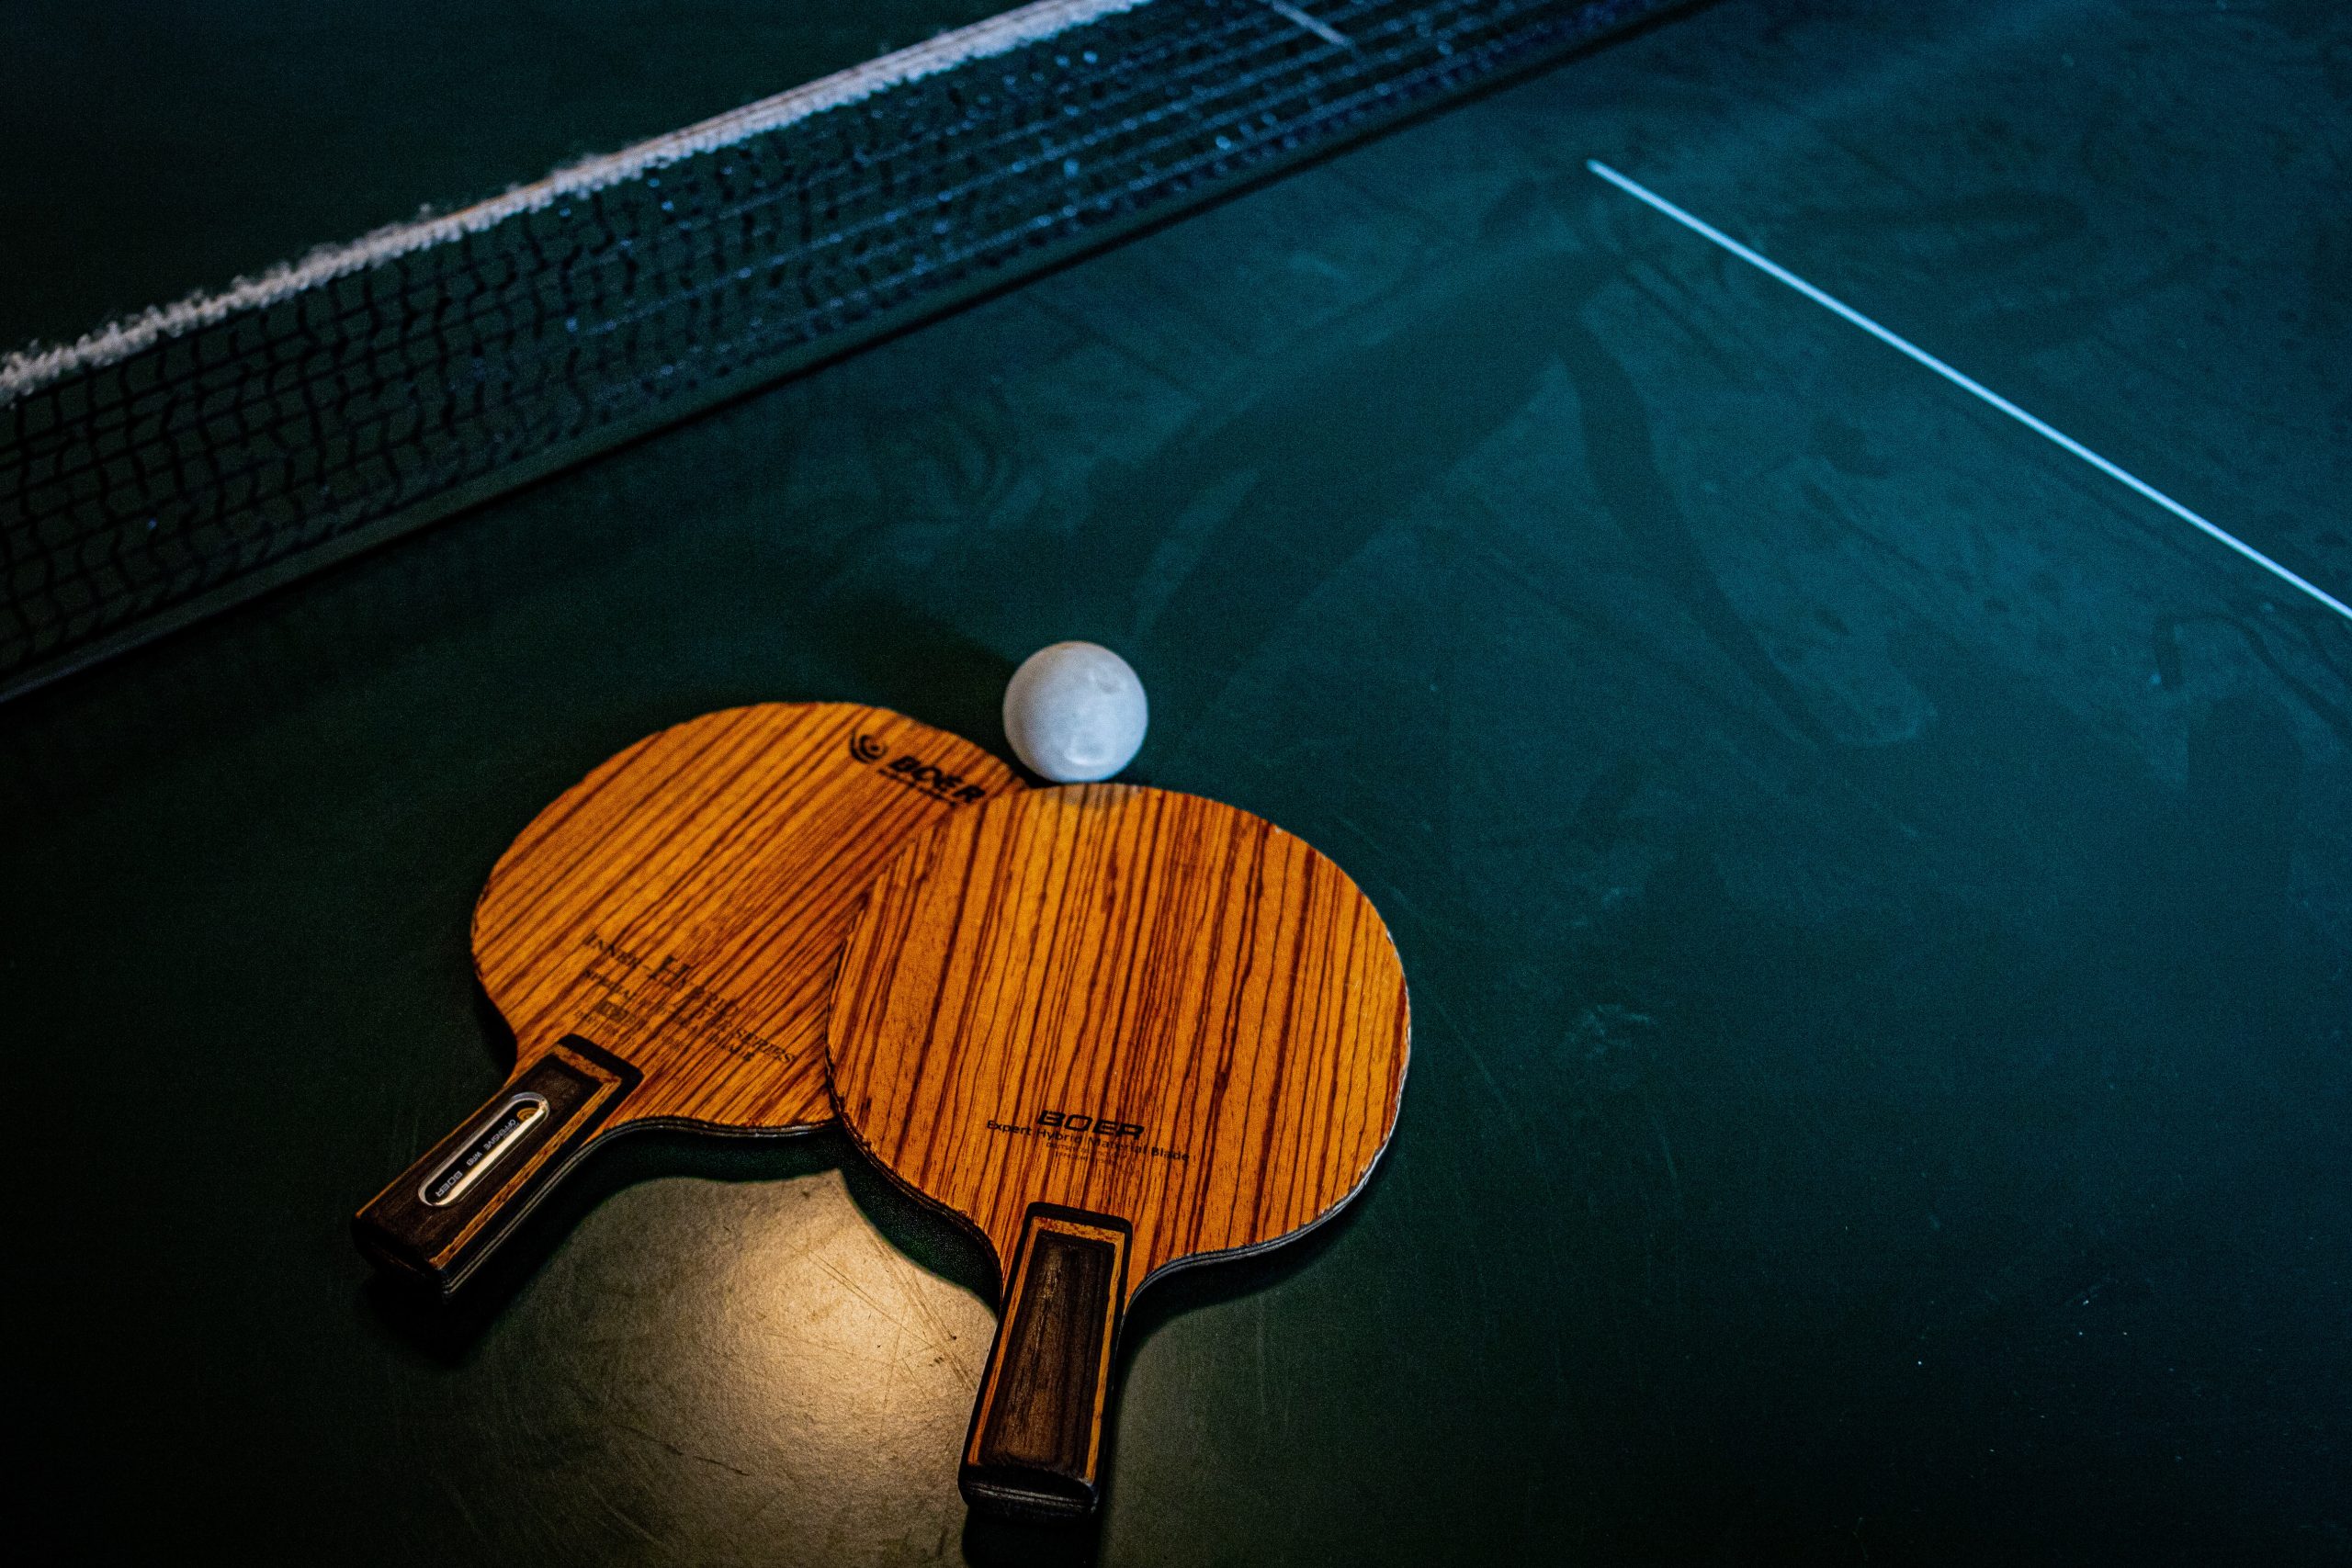 Ping pong rackets and ball on a table